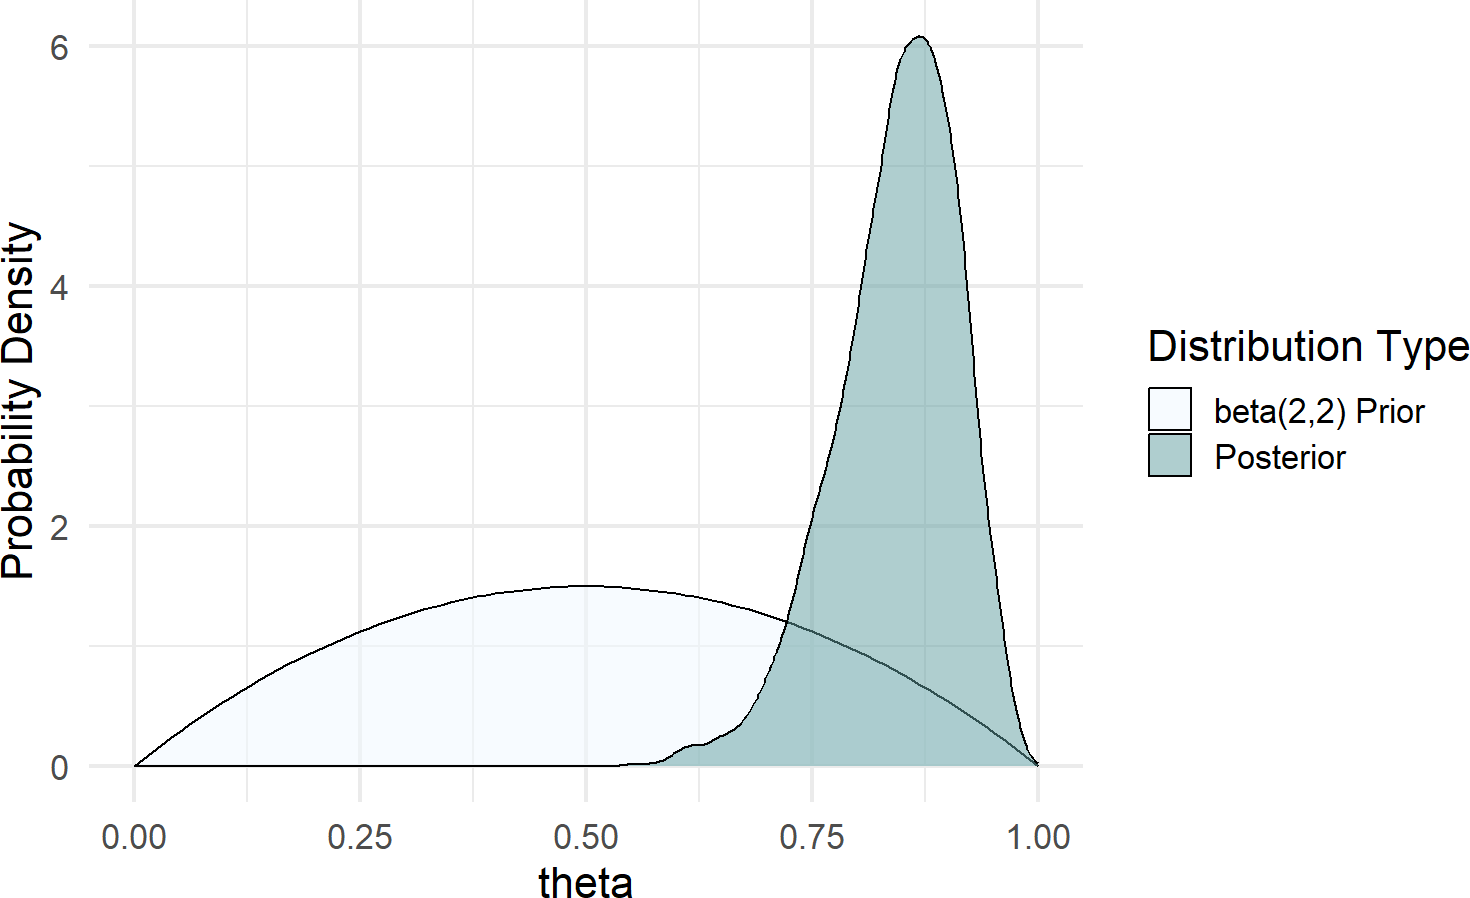 Posterior distribution is right-shifted from the beta(2,2) prior distribution after observing data with 20 successes and 2 failures.